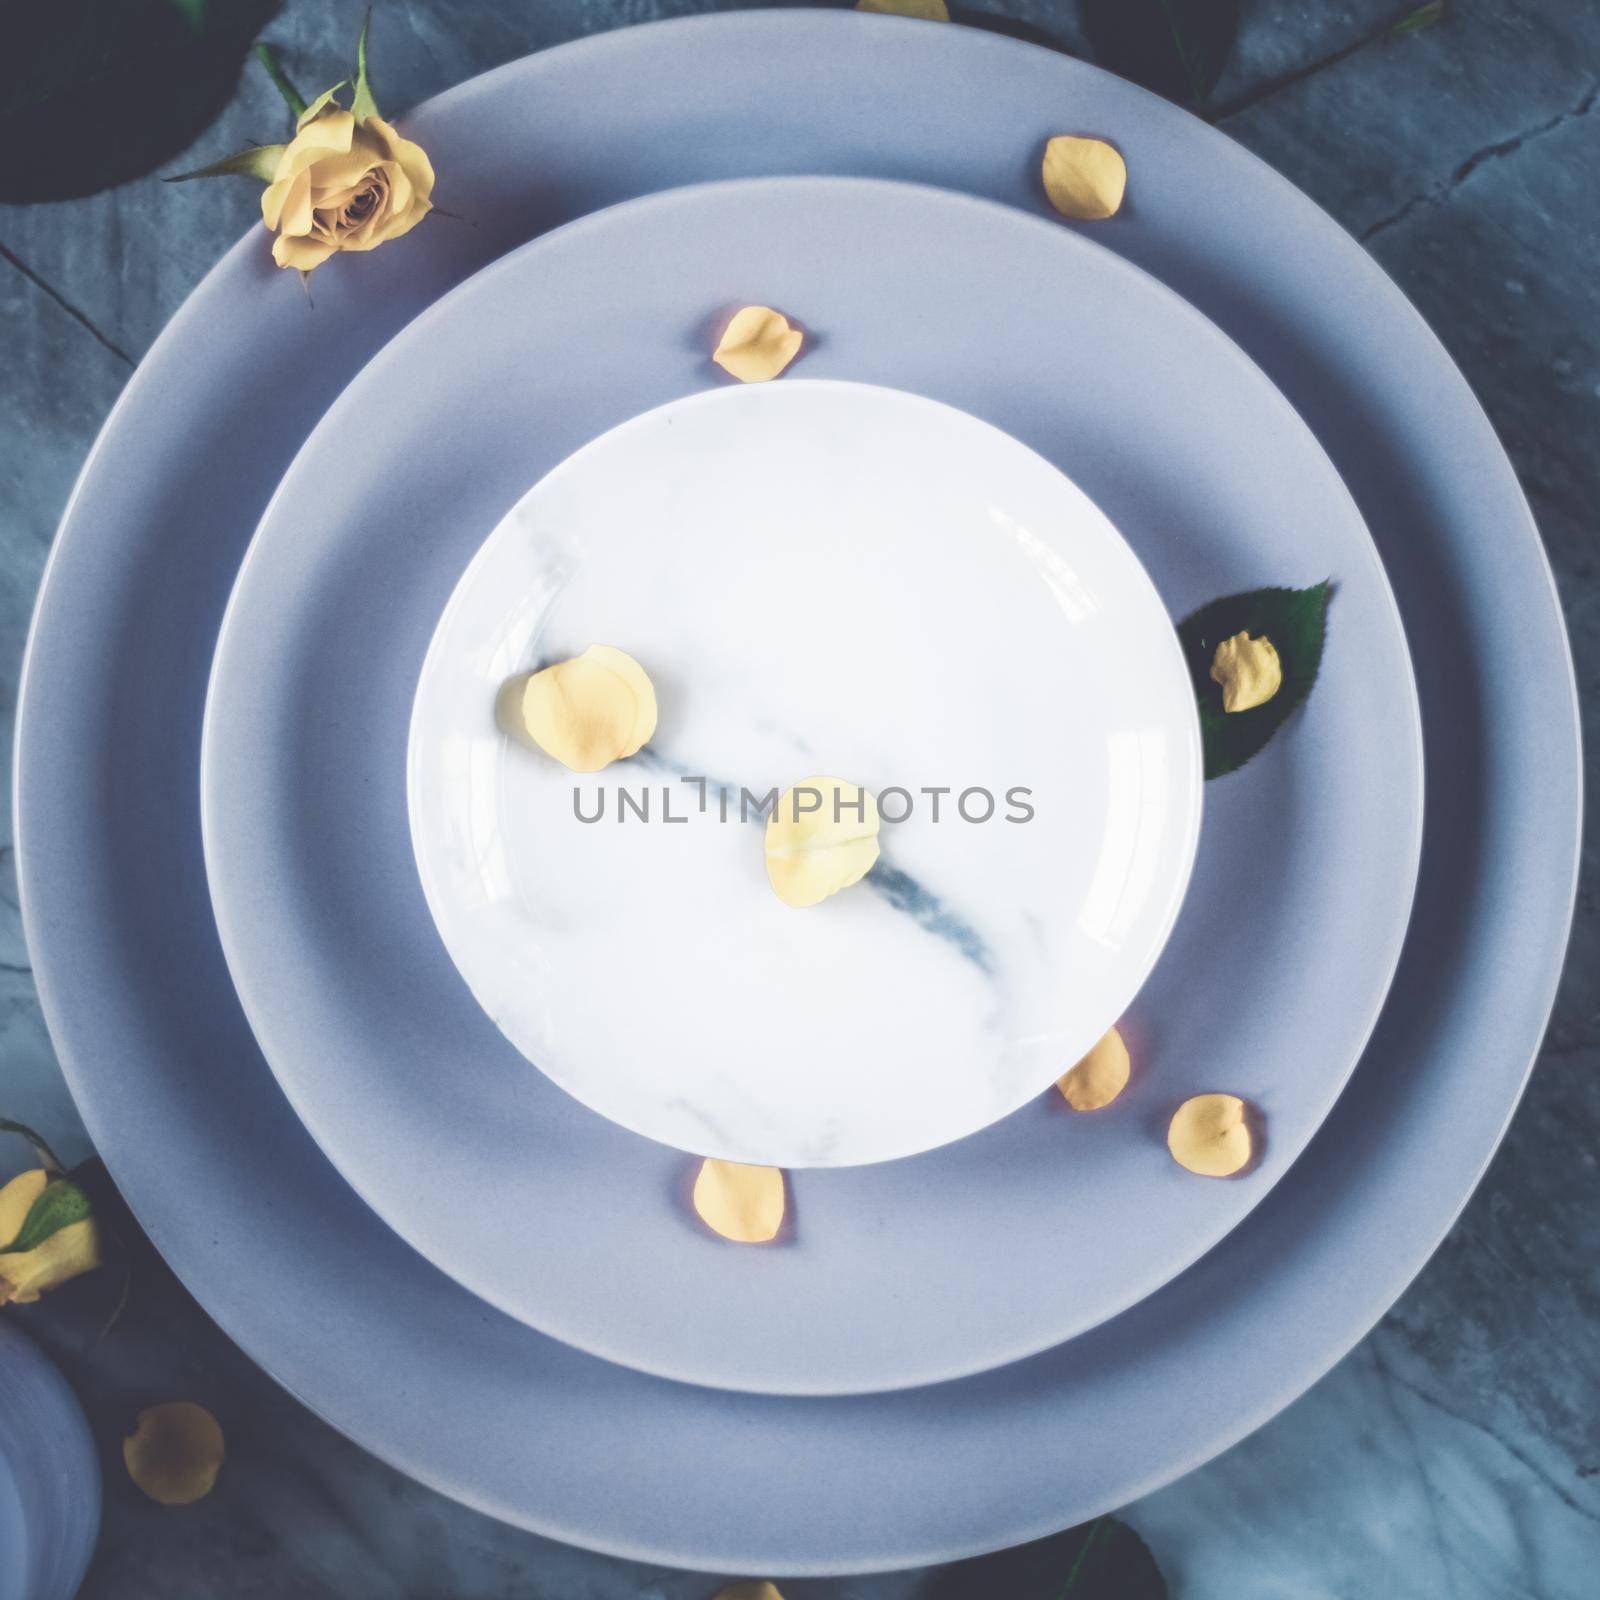 Creative stylish tableware for dinner, flatlay - wedding party, event decoration and inspiration concept. Classy table setting decor idea